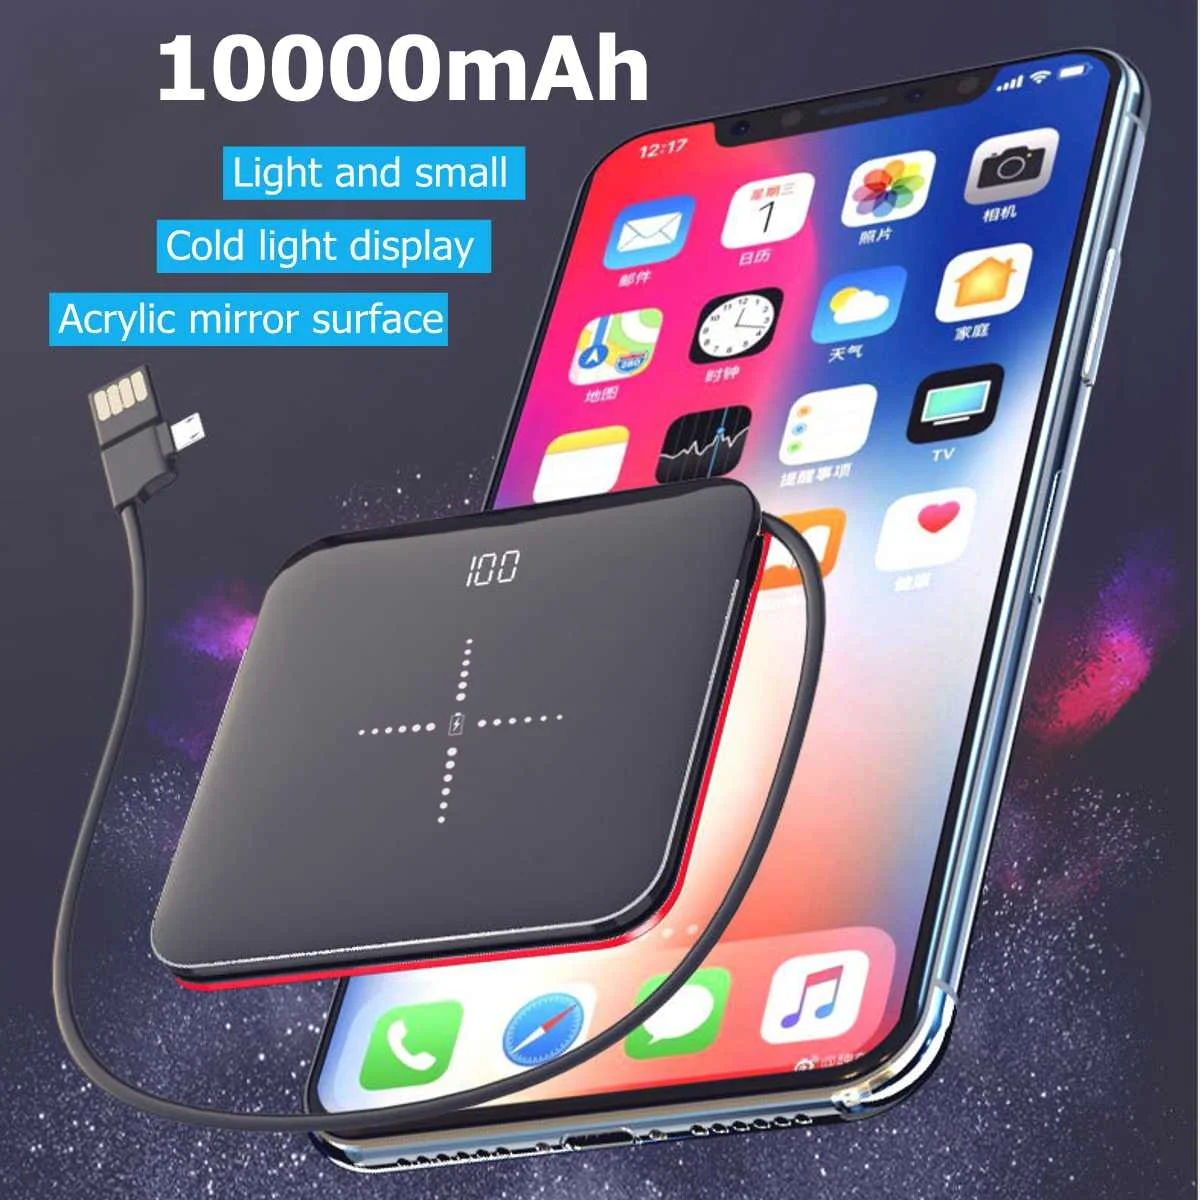 

D72W Mini 1000mAh Qi Wireless Charger Quick Charing 3.0 For Iphone X,8,8 Plus for Xiaomi,Huaiwei 4 in 1 Interface extra Cable